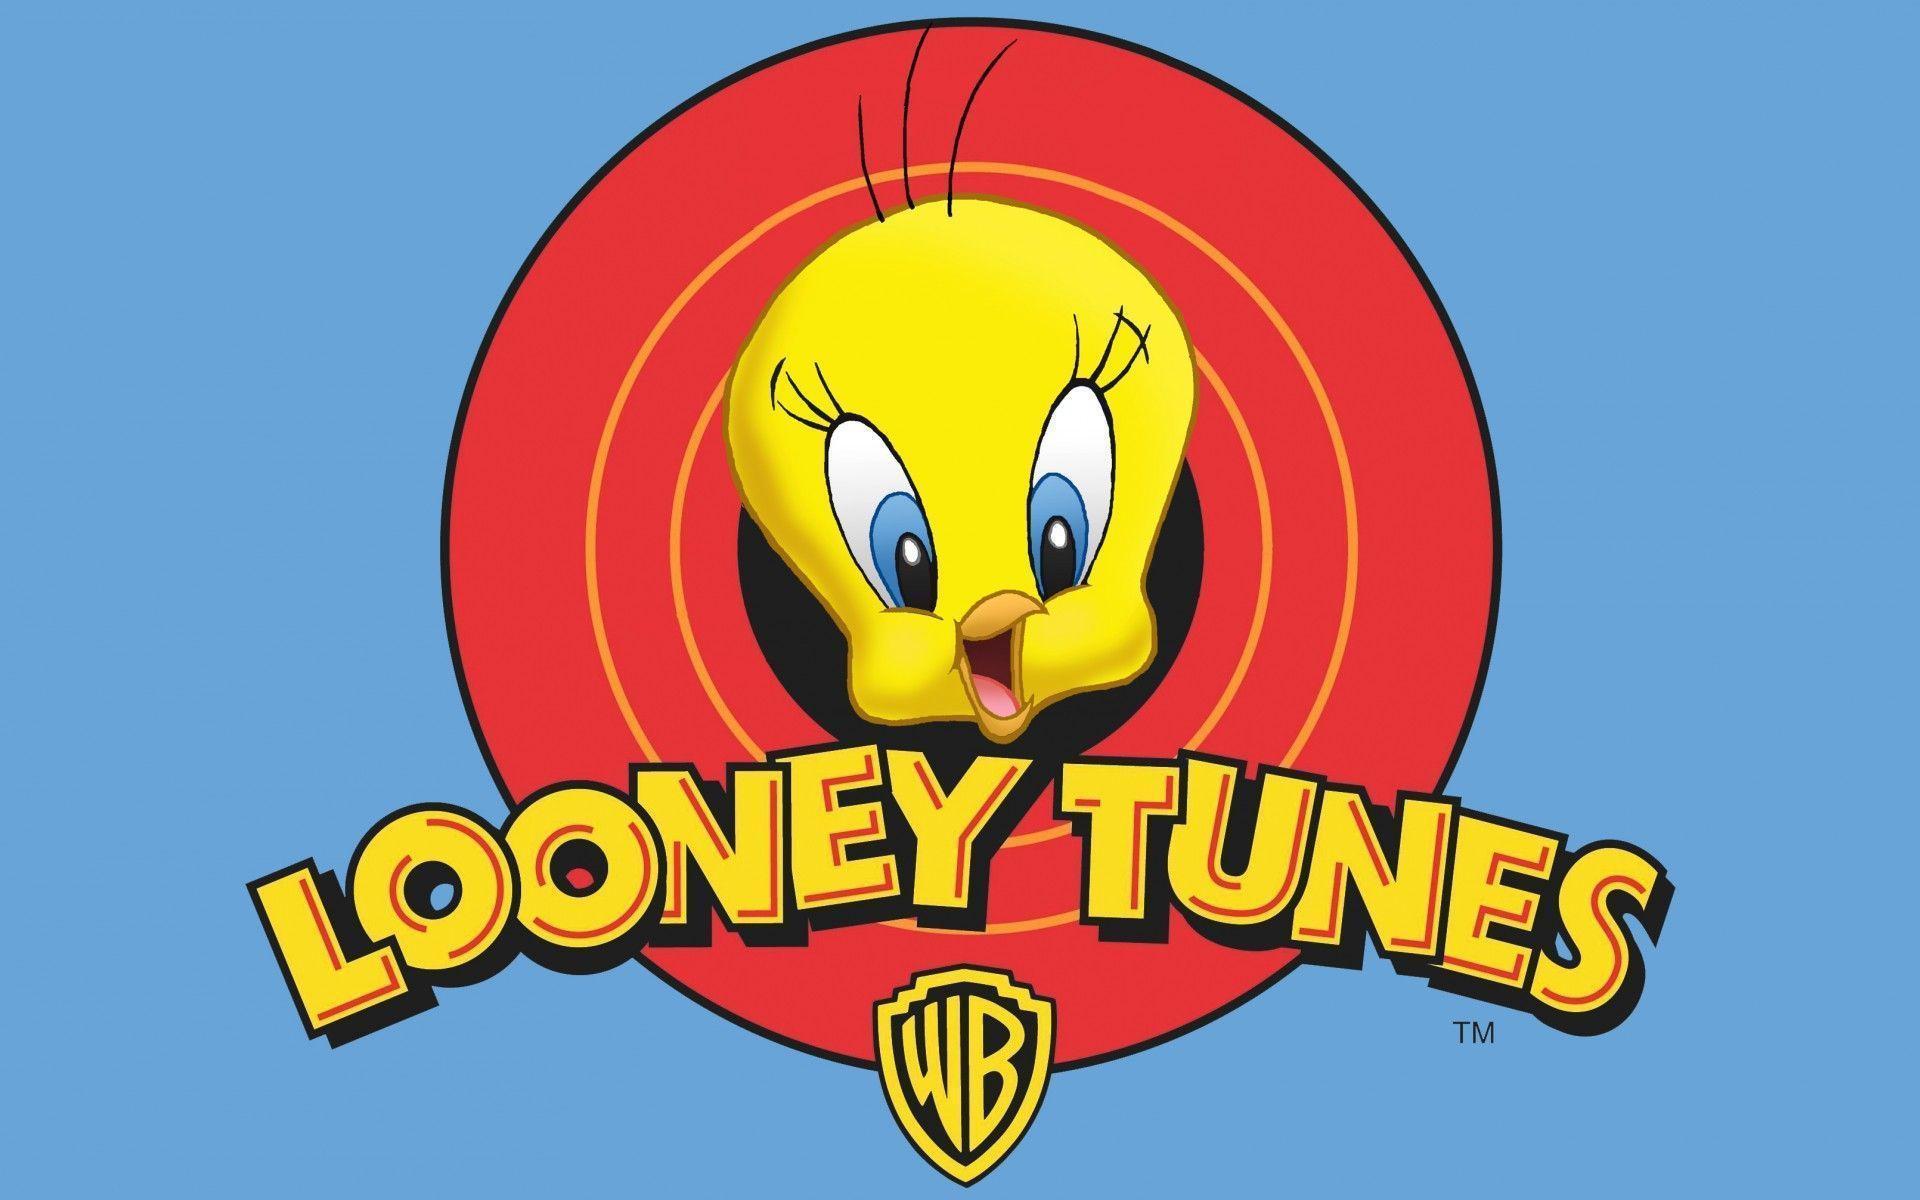 Looney Tunes Hd Backgrounds